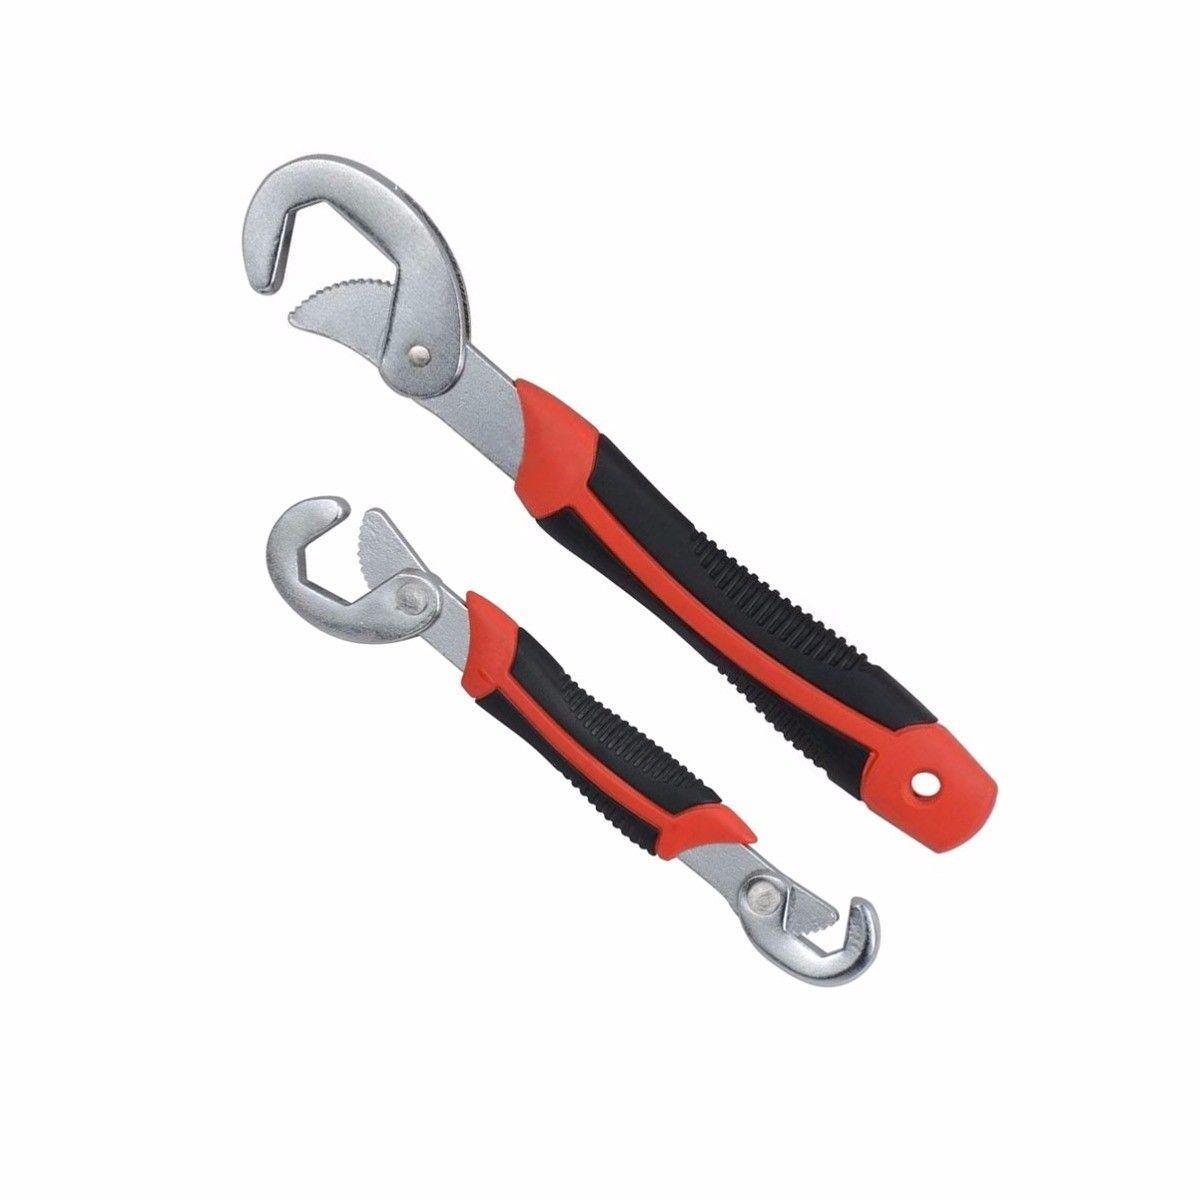 8-32mm POSEIDON Set Of 2 Universal Wrenches Multi Use DIY 4819 (Parcel Rate)